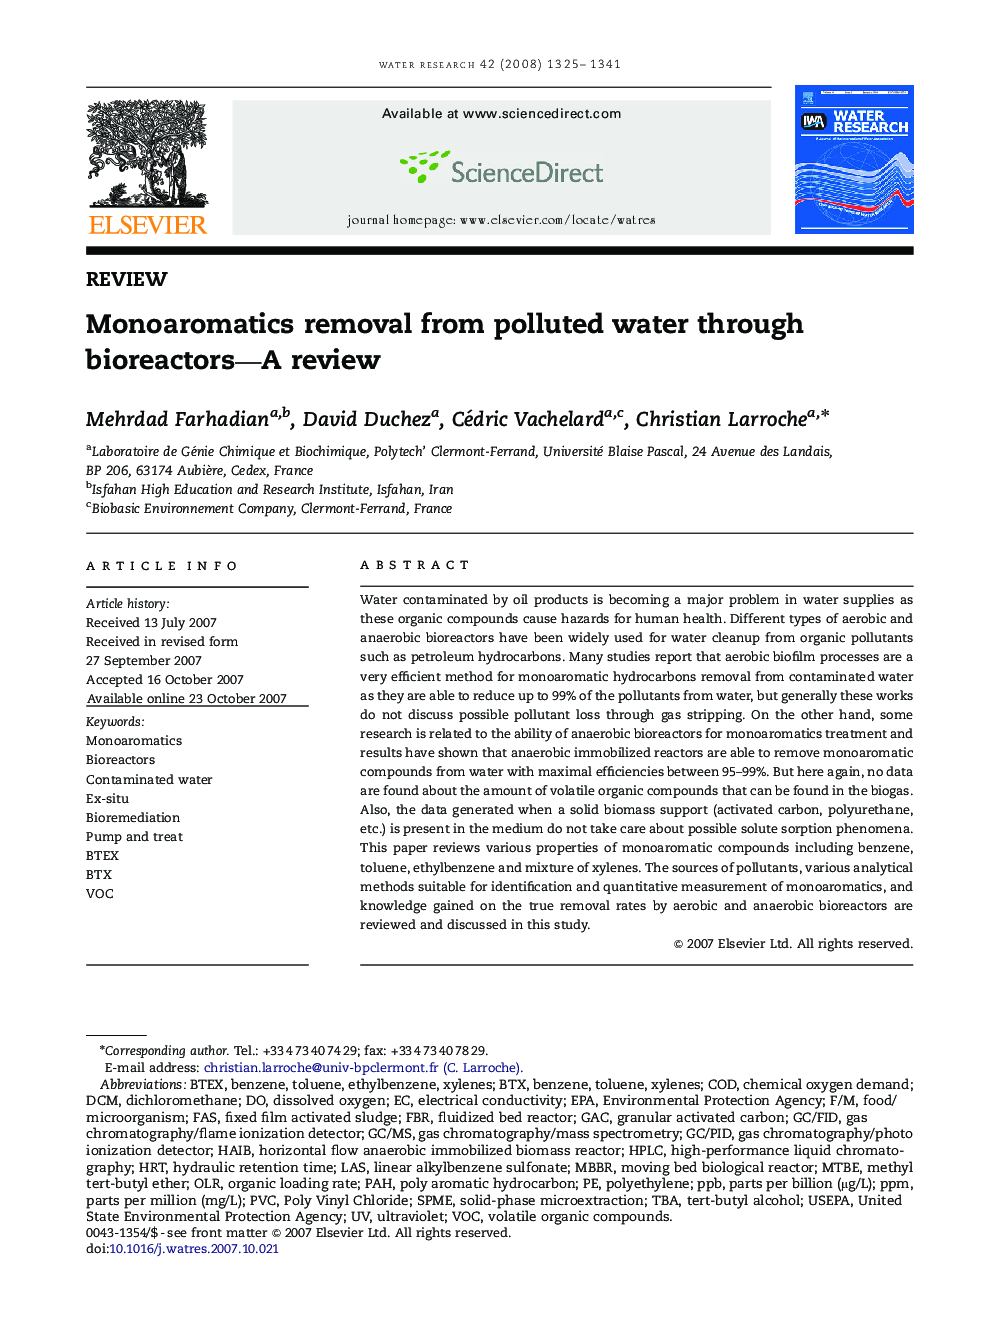 Monoaromatics removal from polluted water through bioreactors—A review